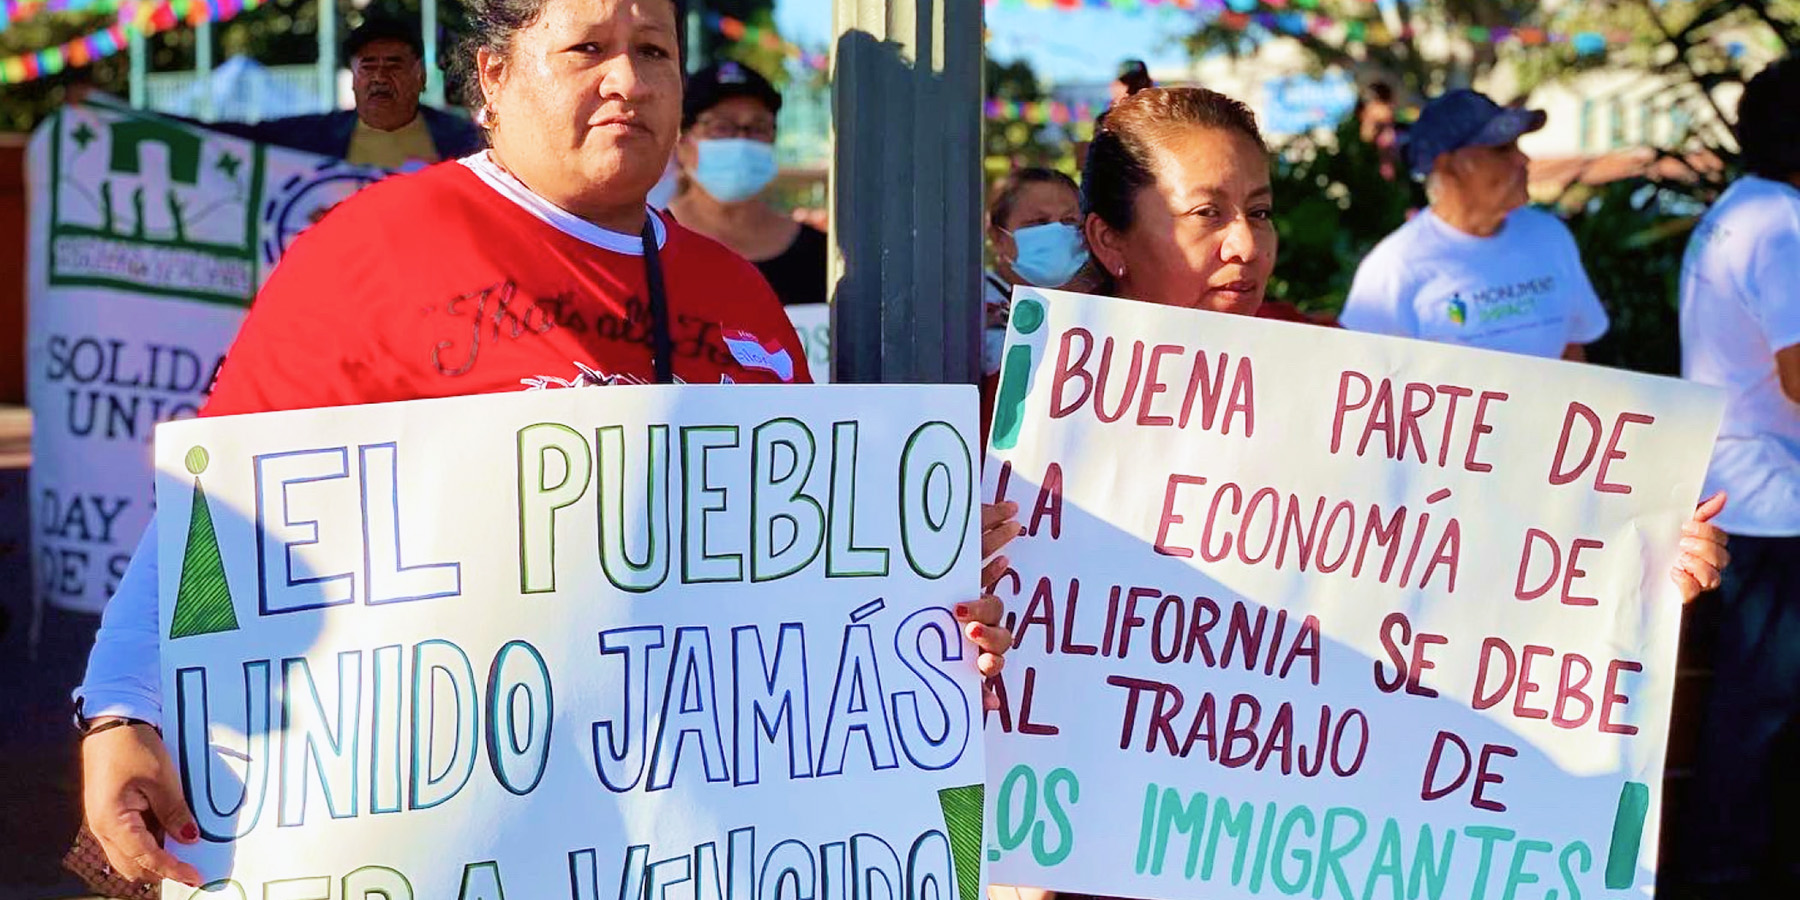 Two people hold signs at a demonstration for immigration rights.